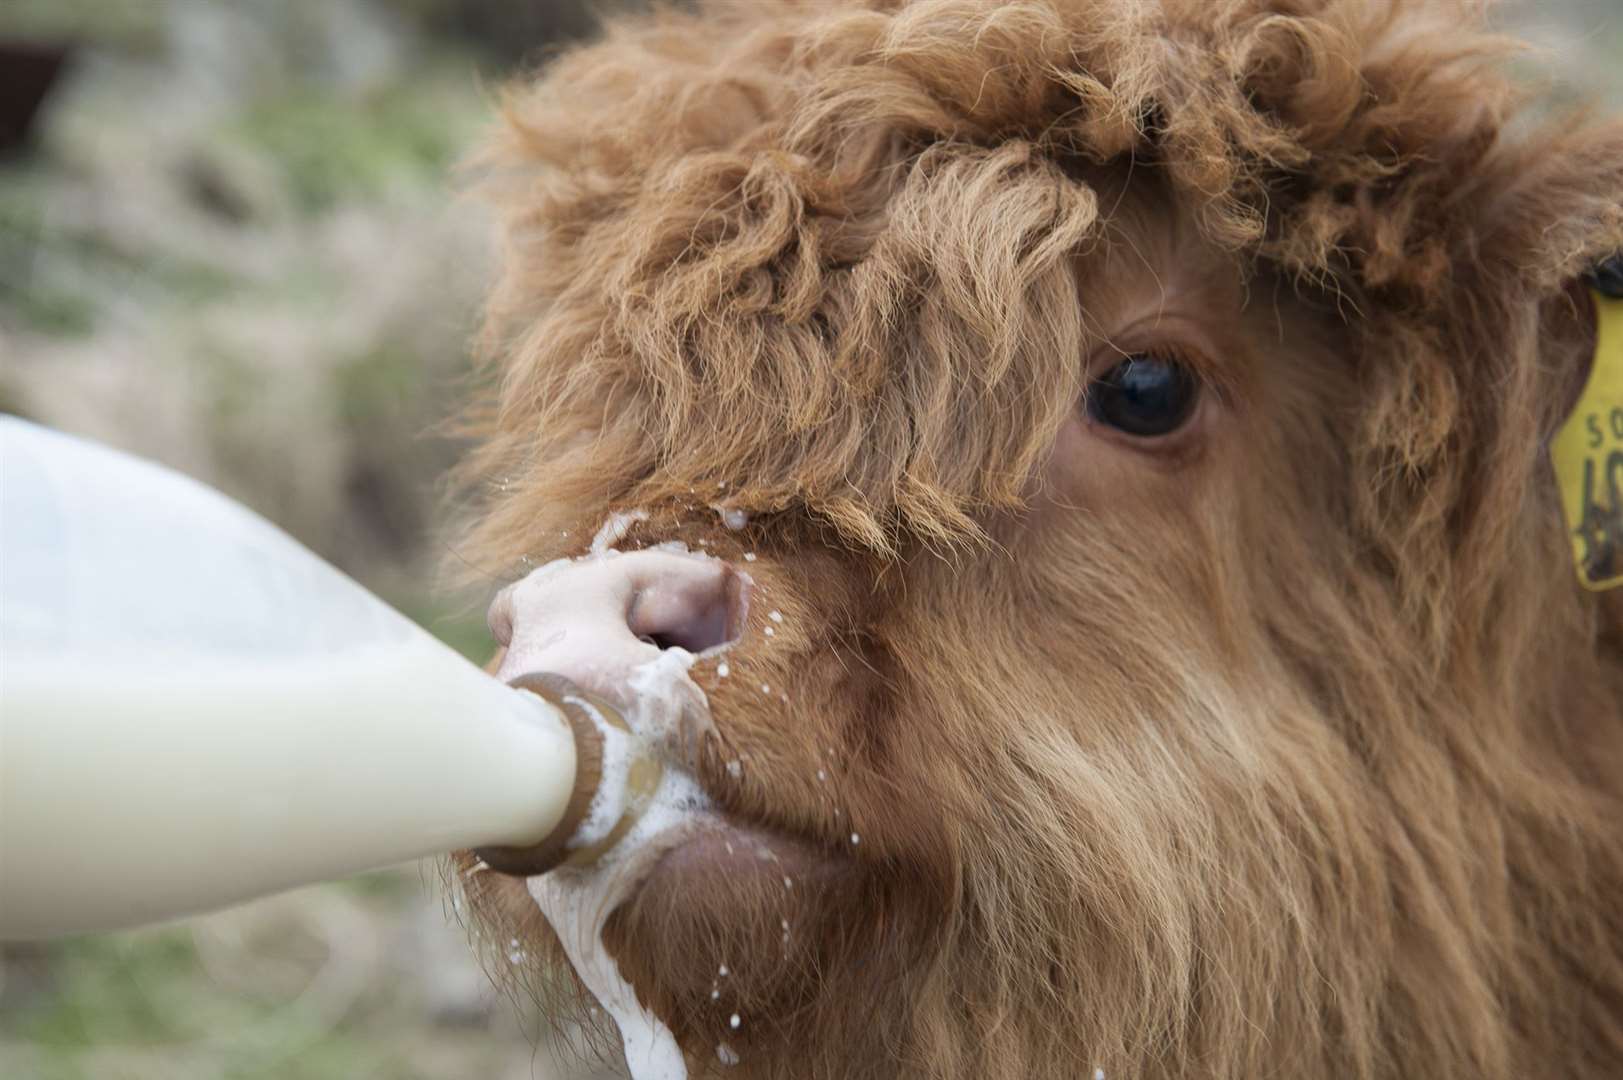 A stunning close-up image by Mike Roper of a Highland calf being bottle fed.